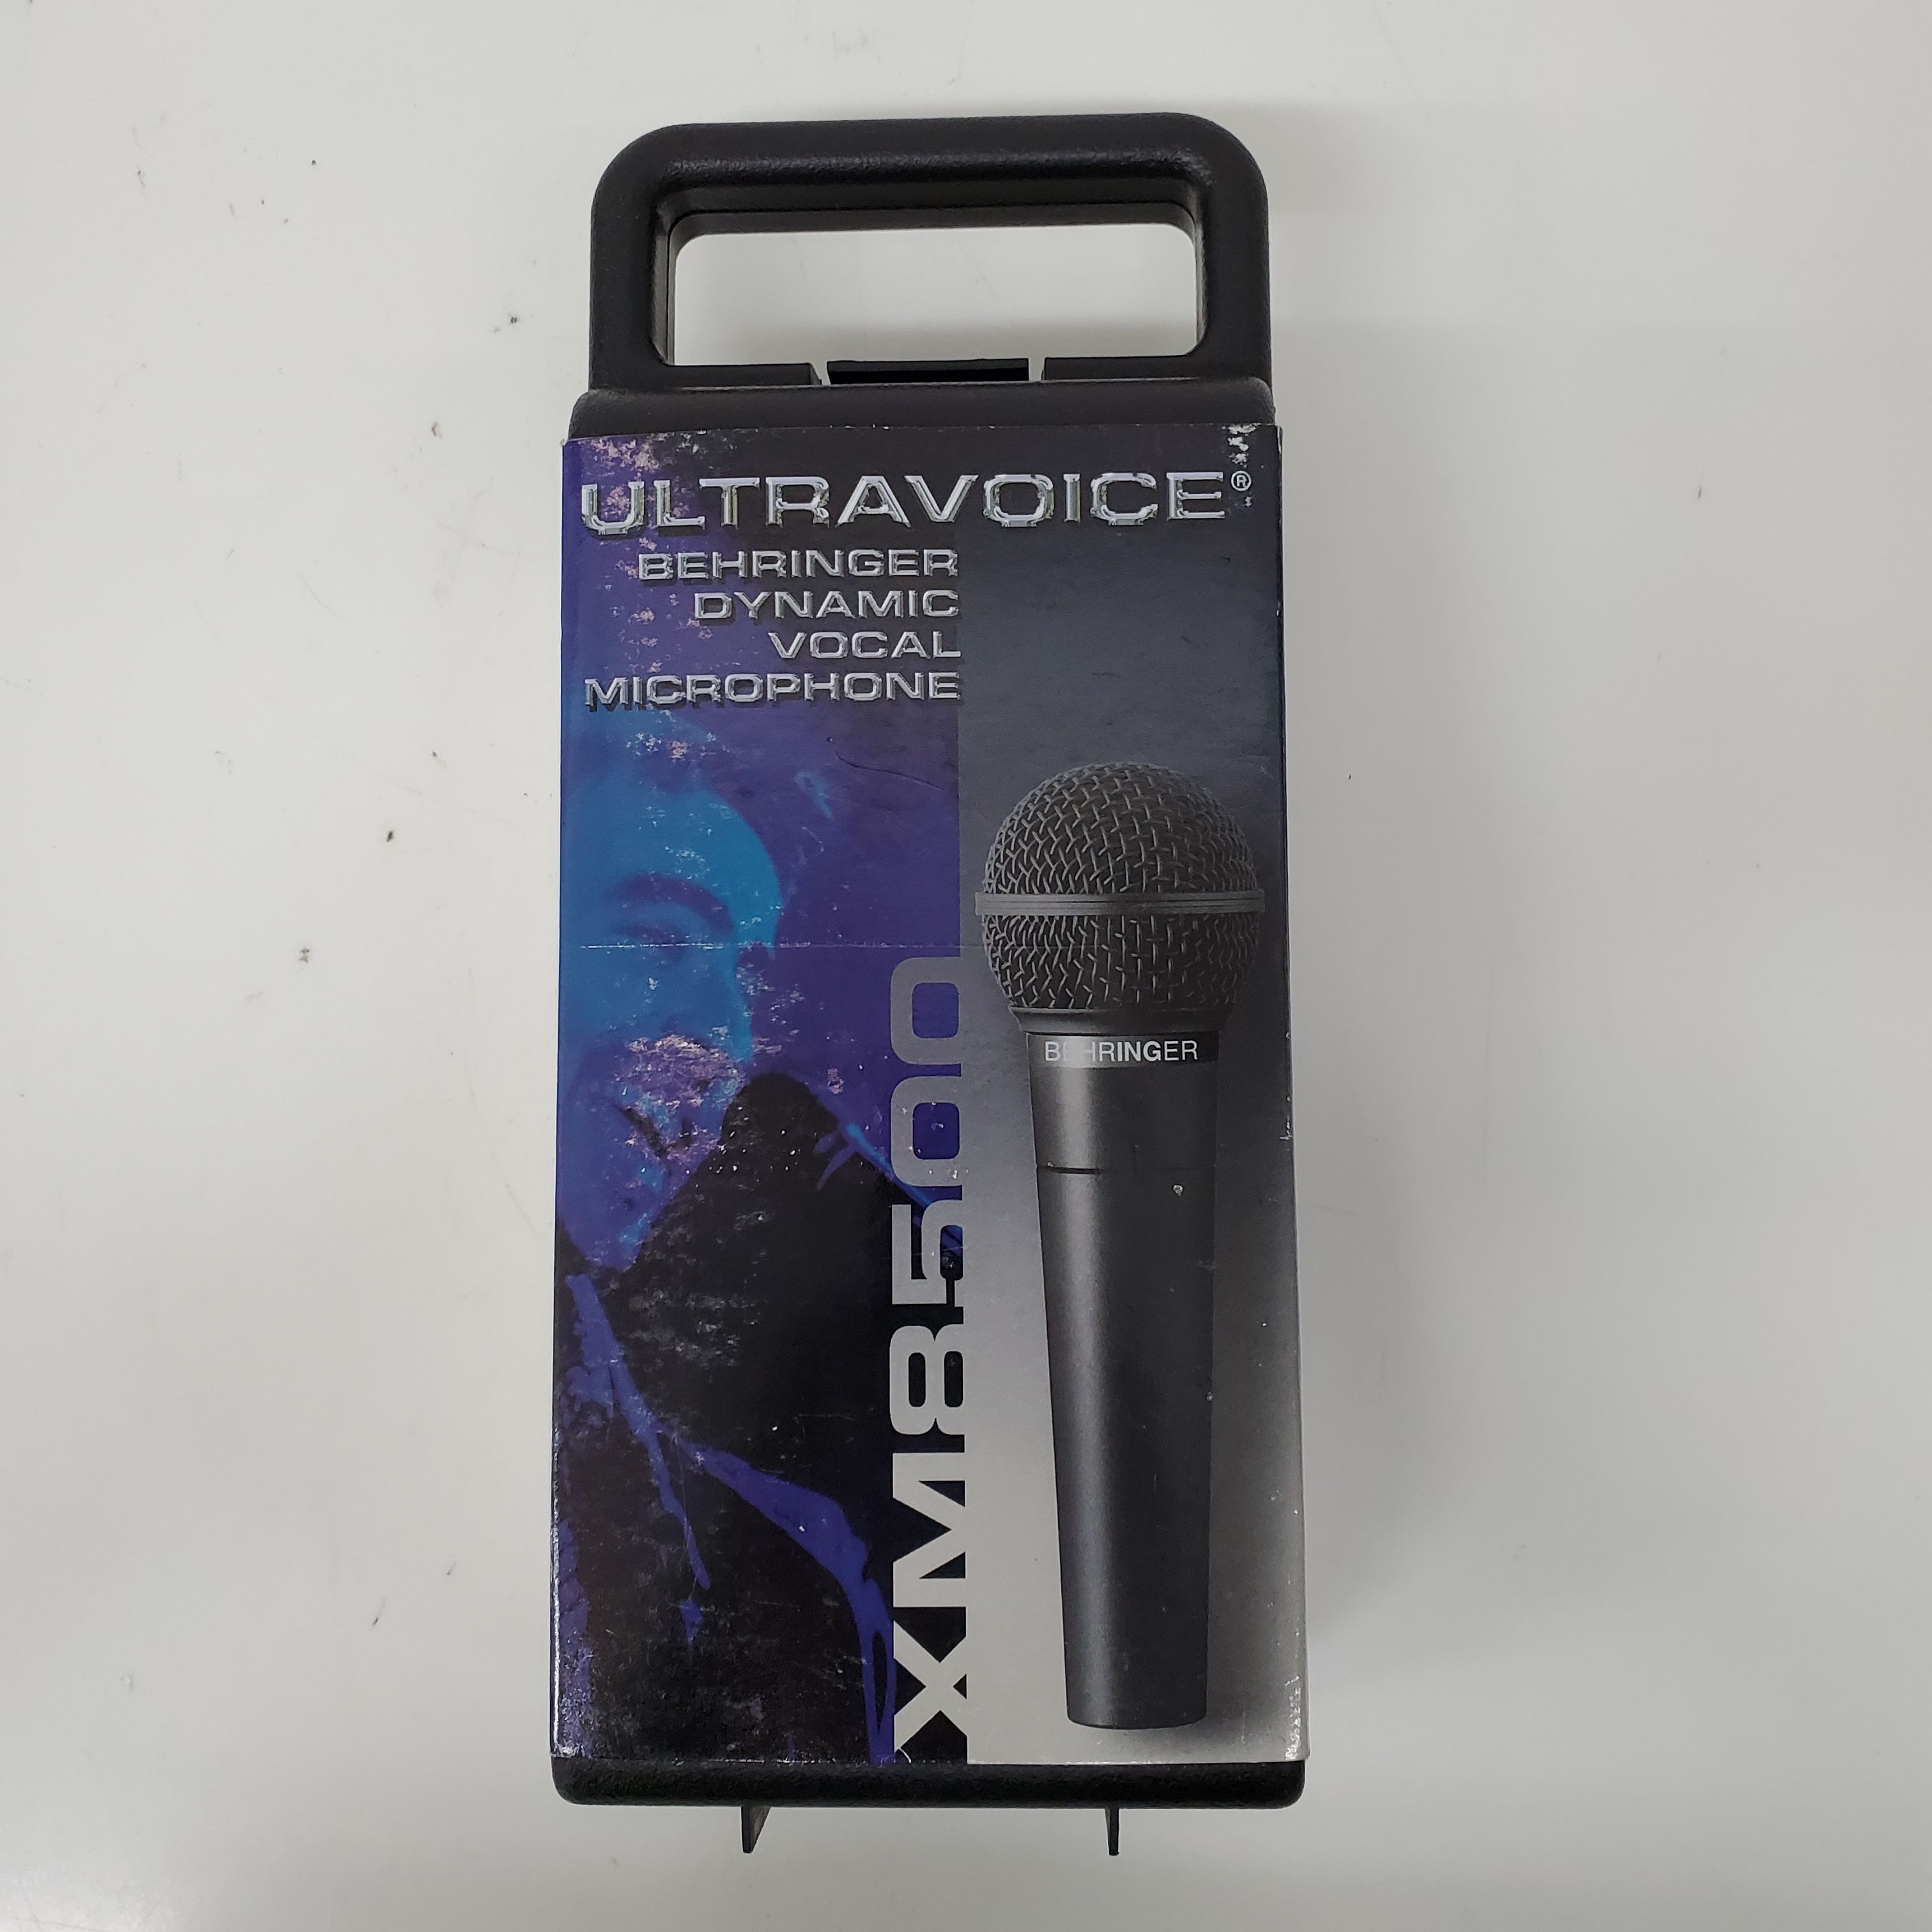 Buy the Behringer XM8500 Ultravoice Dynamic Vocal Microphone w